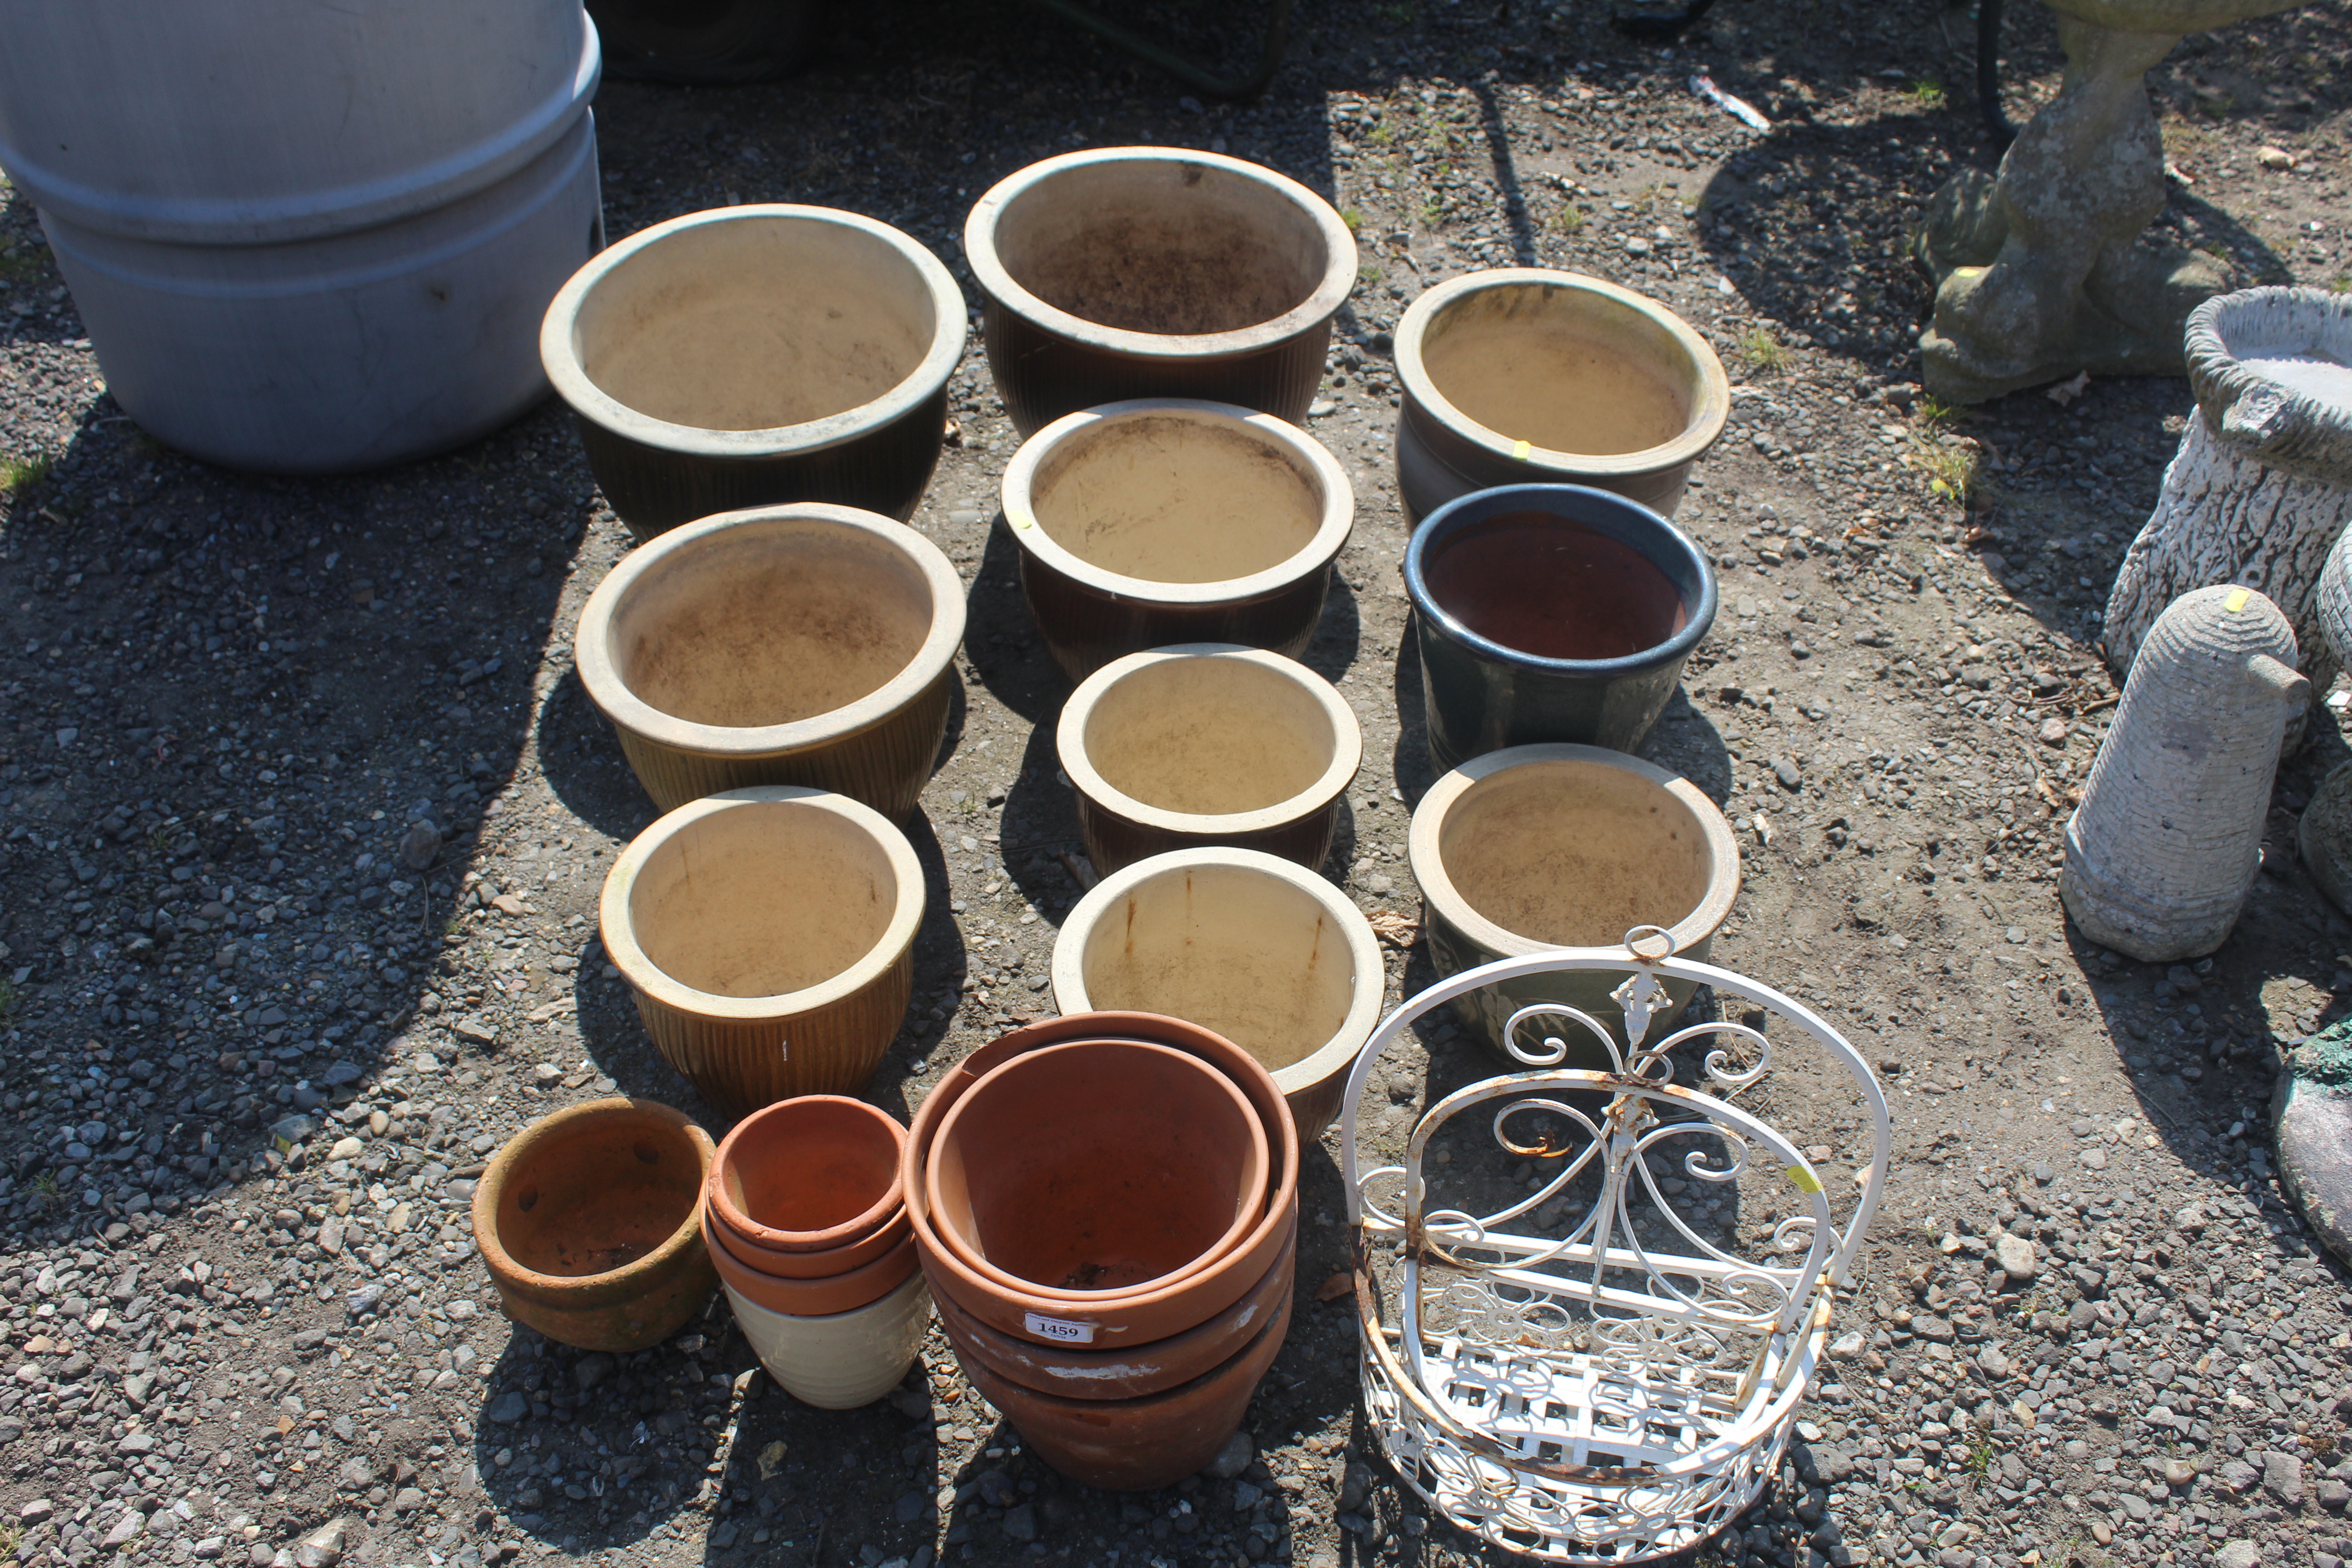 A quantity of various glazed and terracotta plant